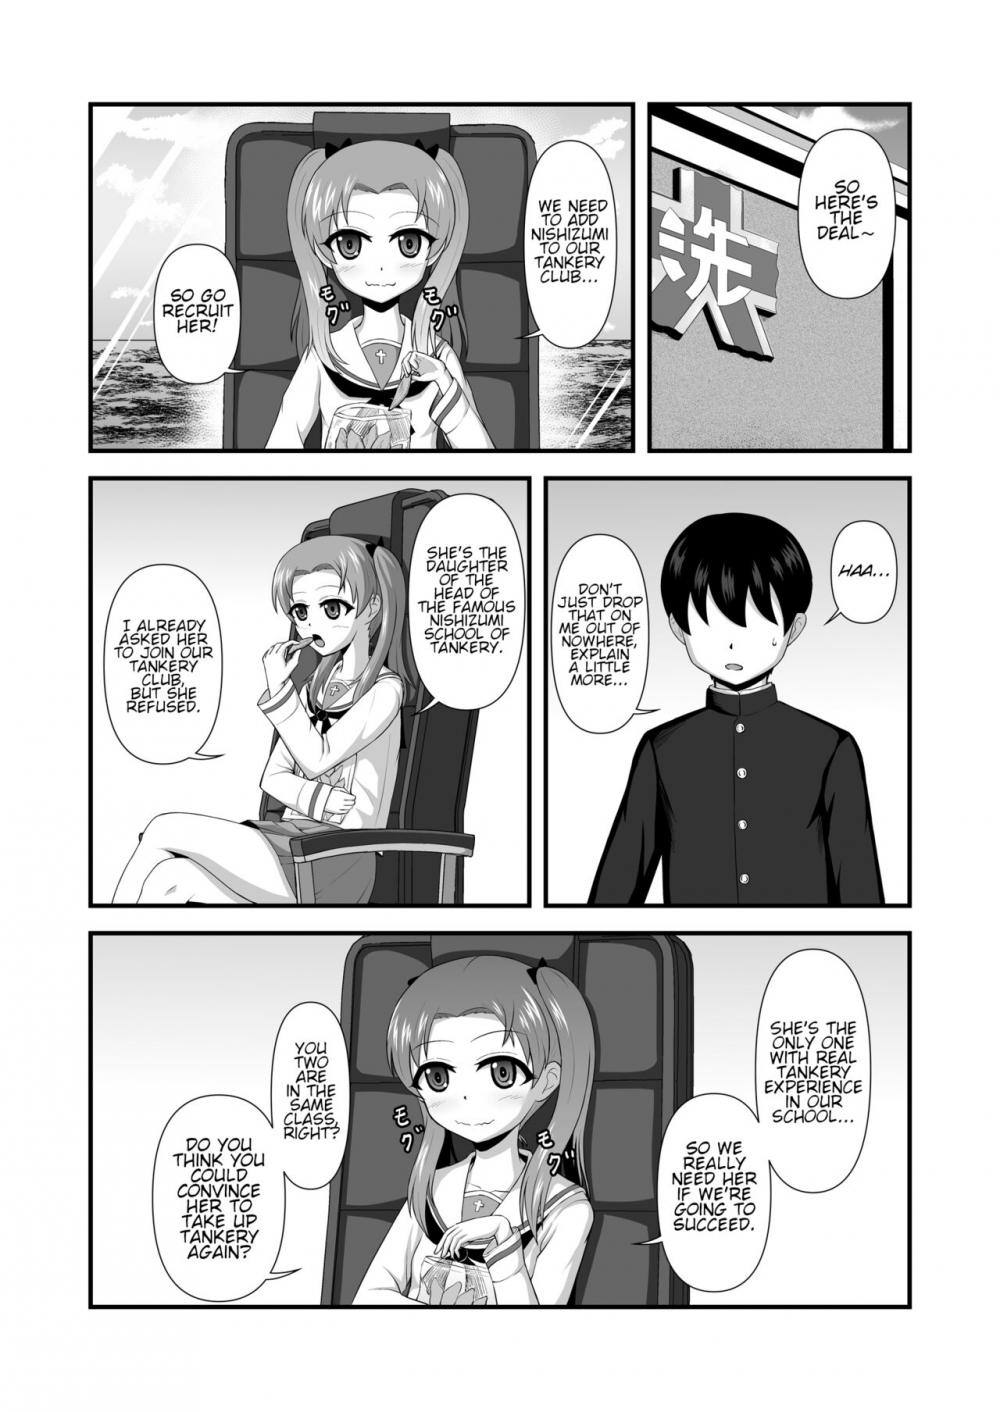 Hentai Manga Comic-A Tale of Reversed Gender Roles 3-Read-2